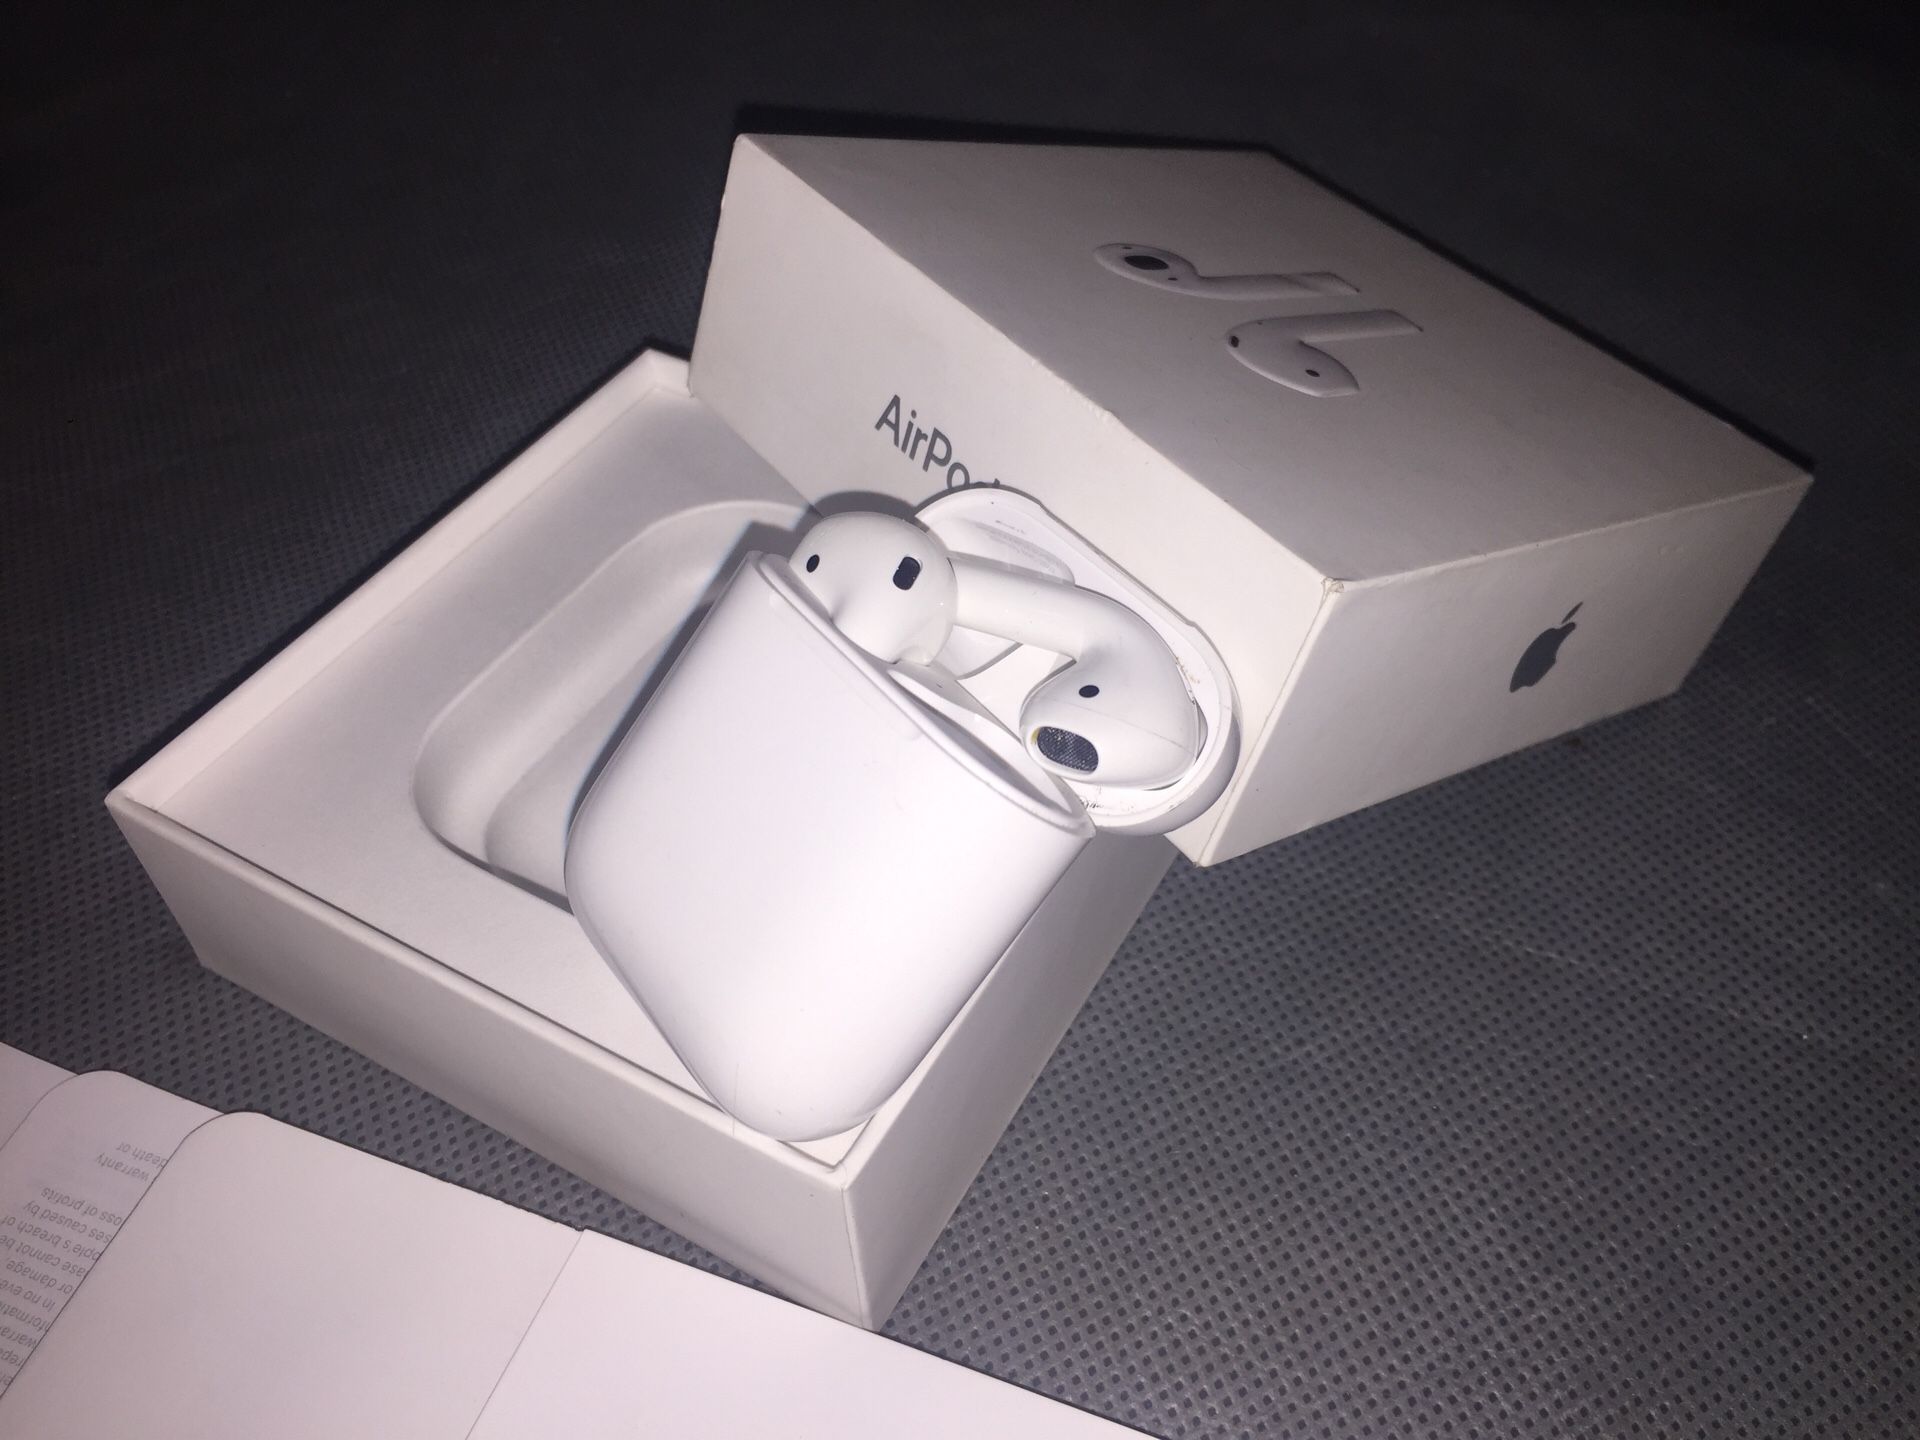 Apple AirPods model A1602